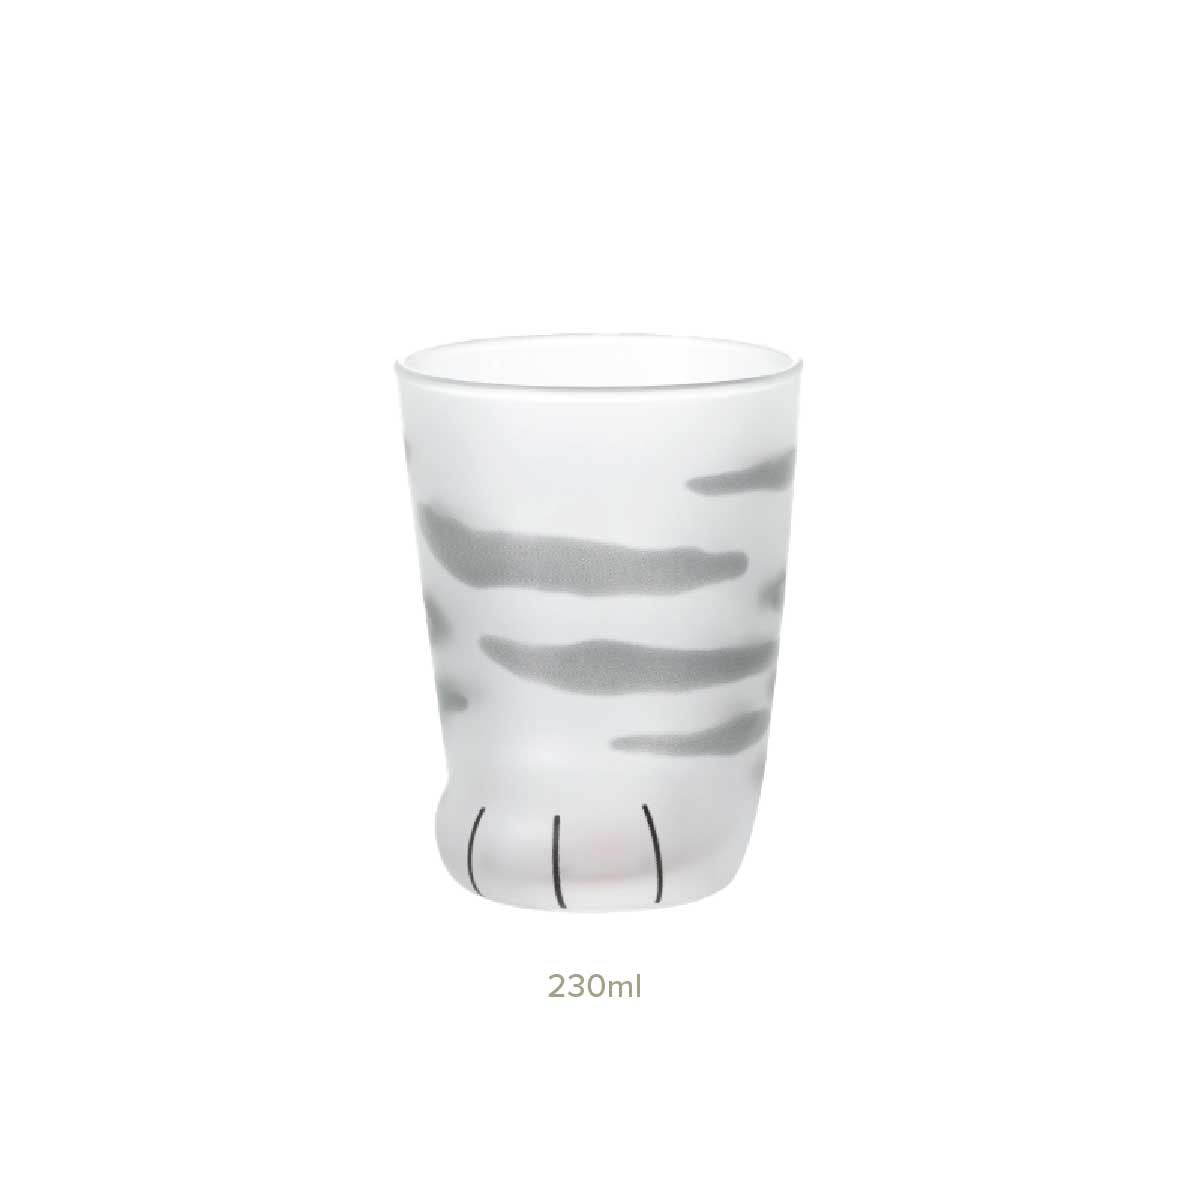 Grey Tabby Cat Paw Frosted Glass Cup